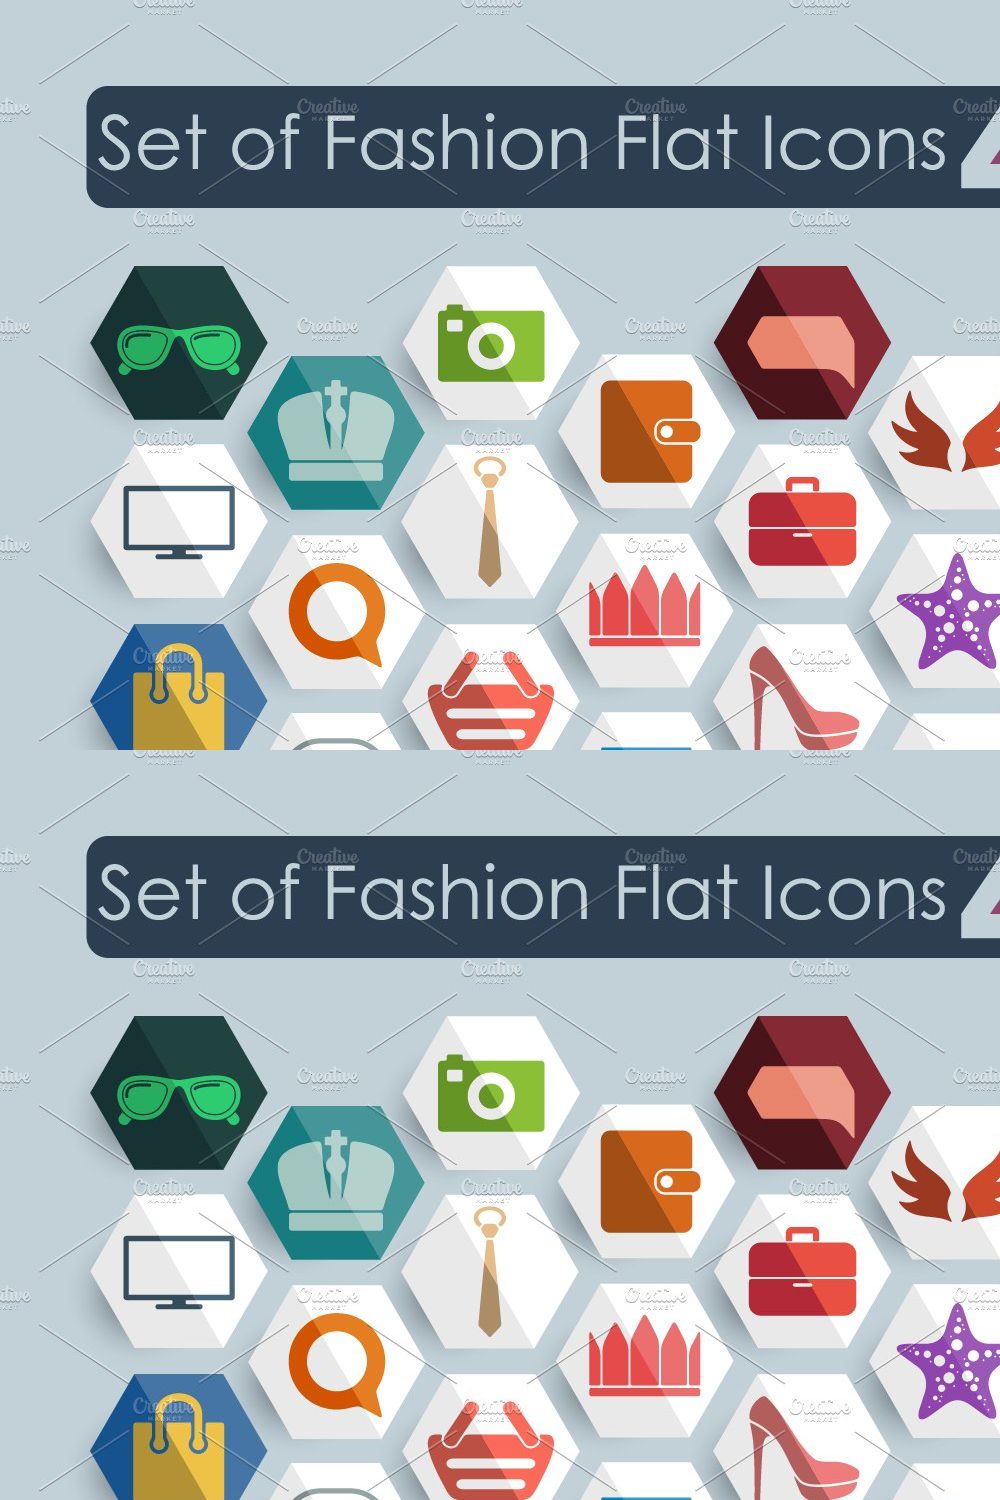 46 FASHION flat icons pinterest preview image.